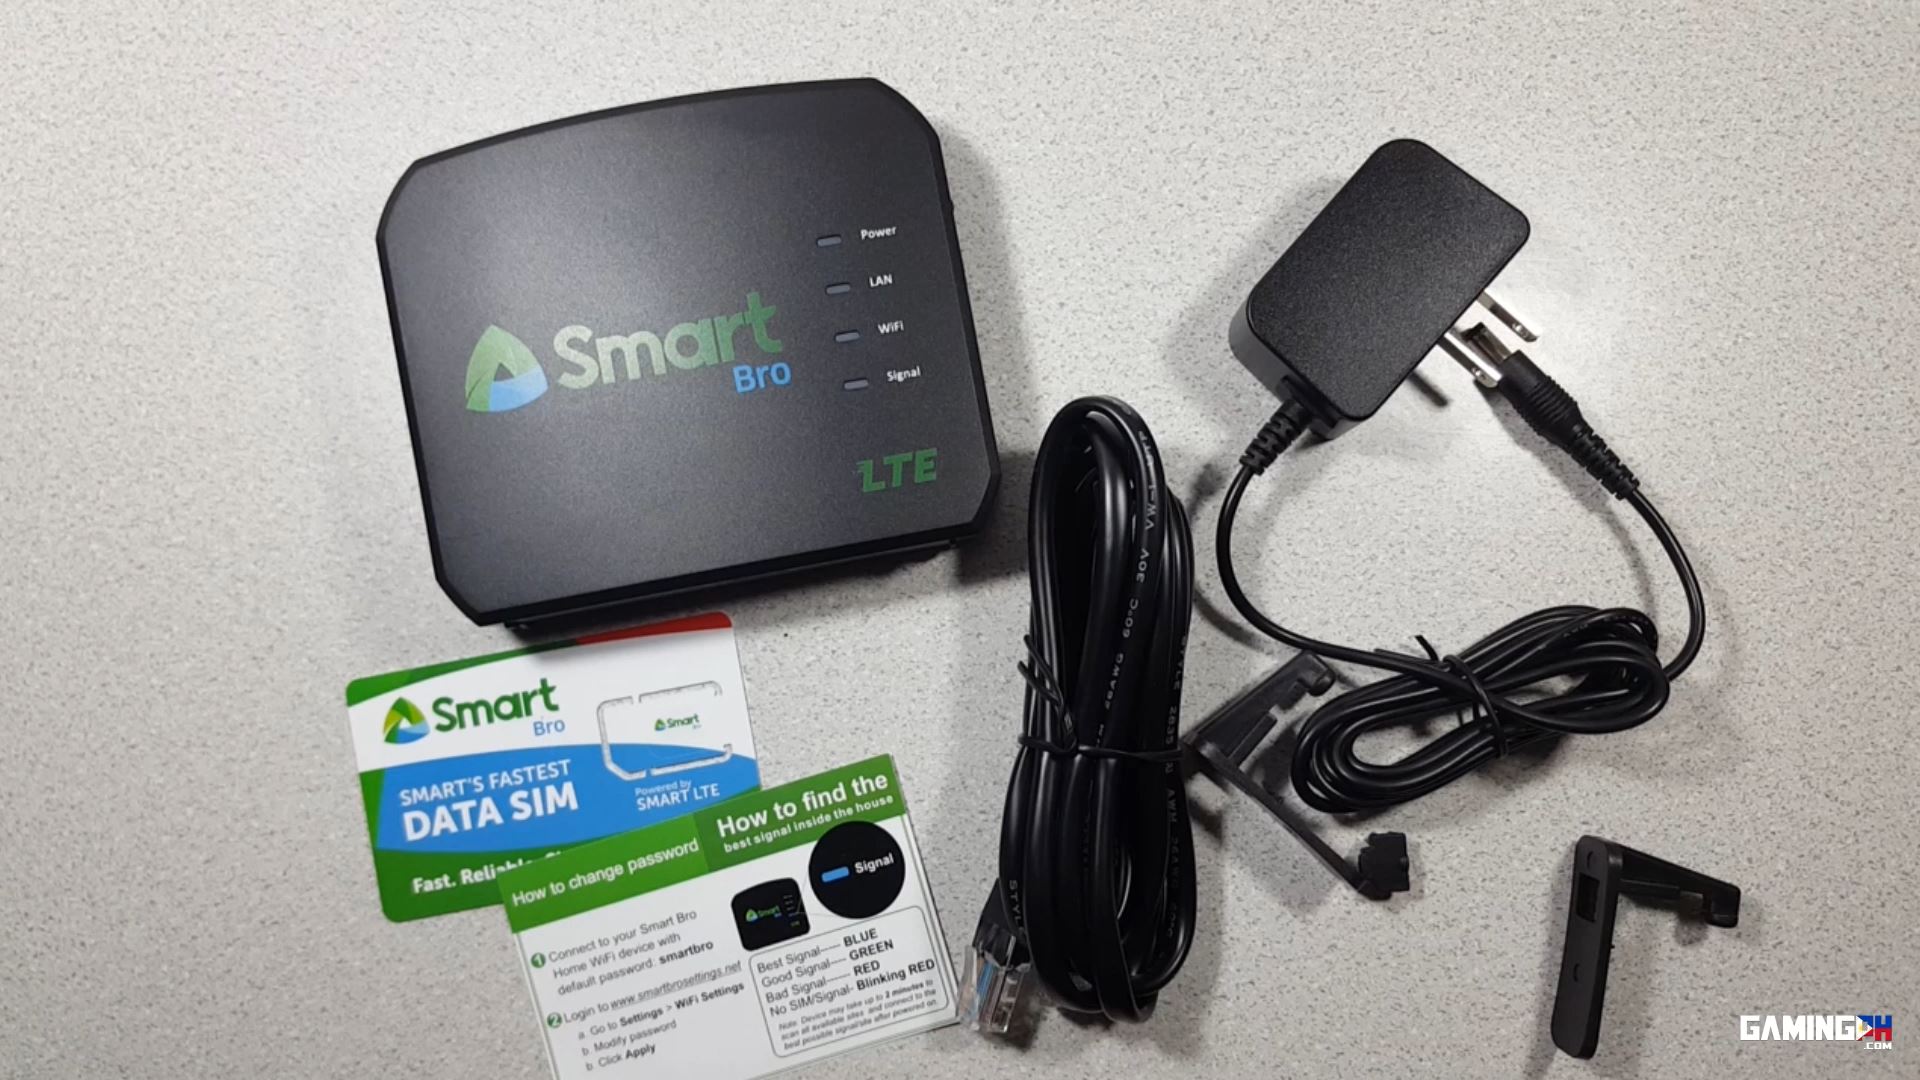 Smart Bro Prepaid LTE Home Wifi Router Unboxing and Review | GamingPH.com